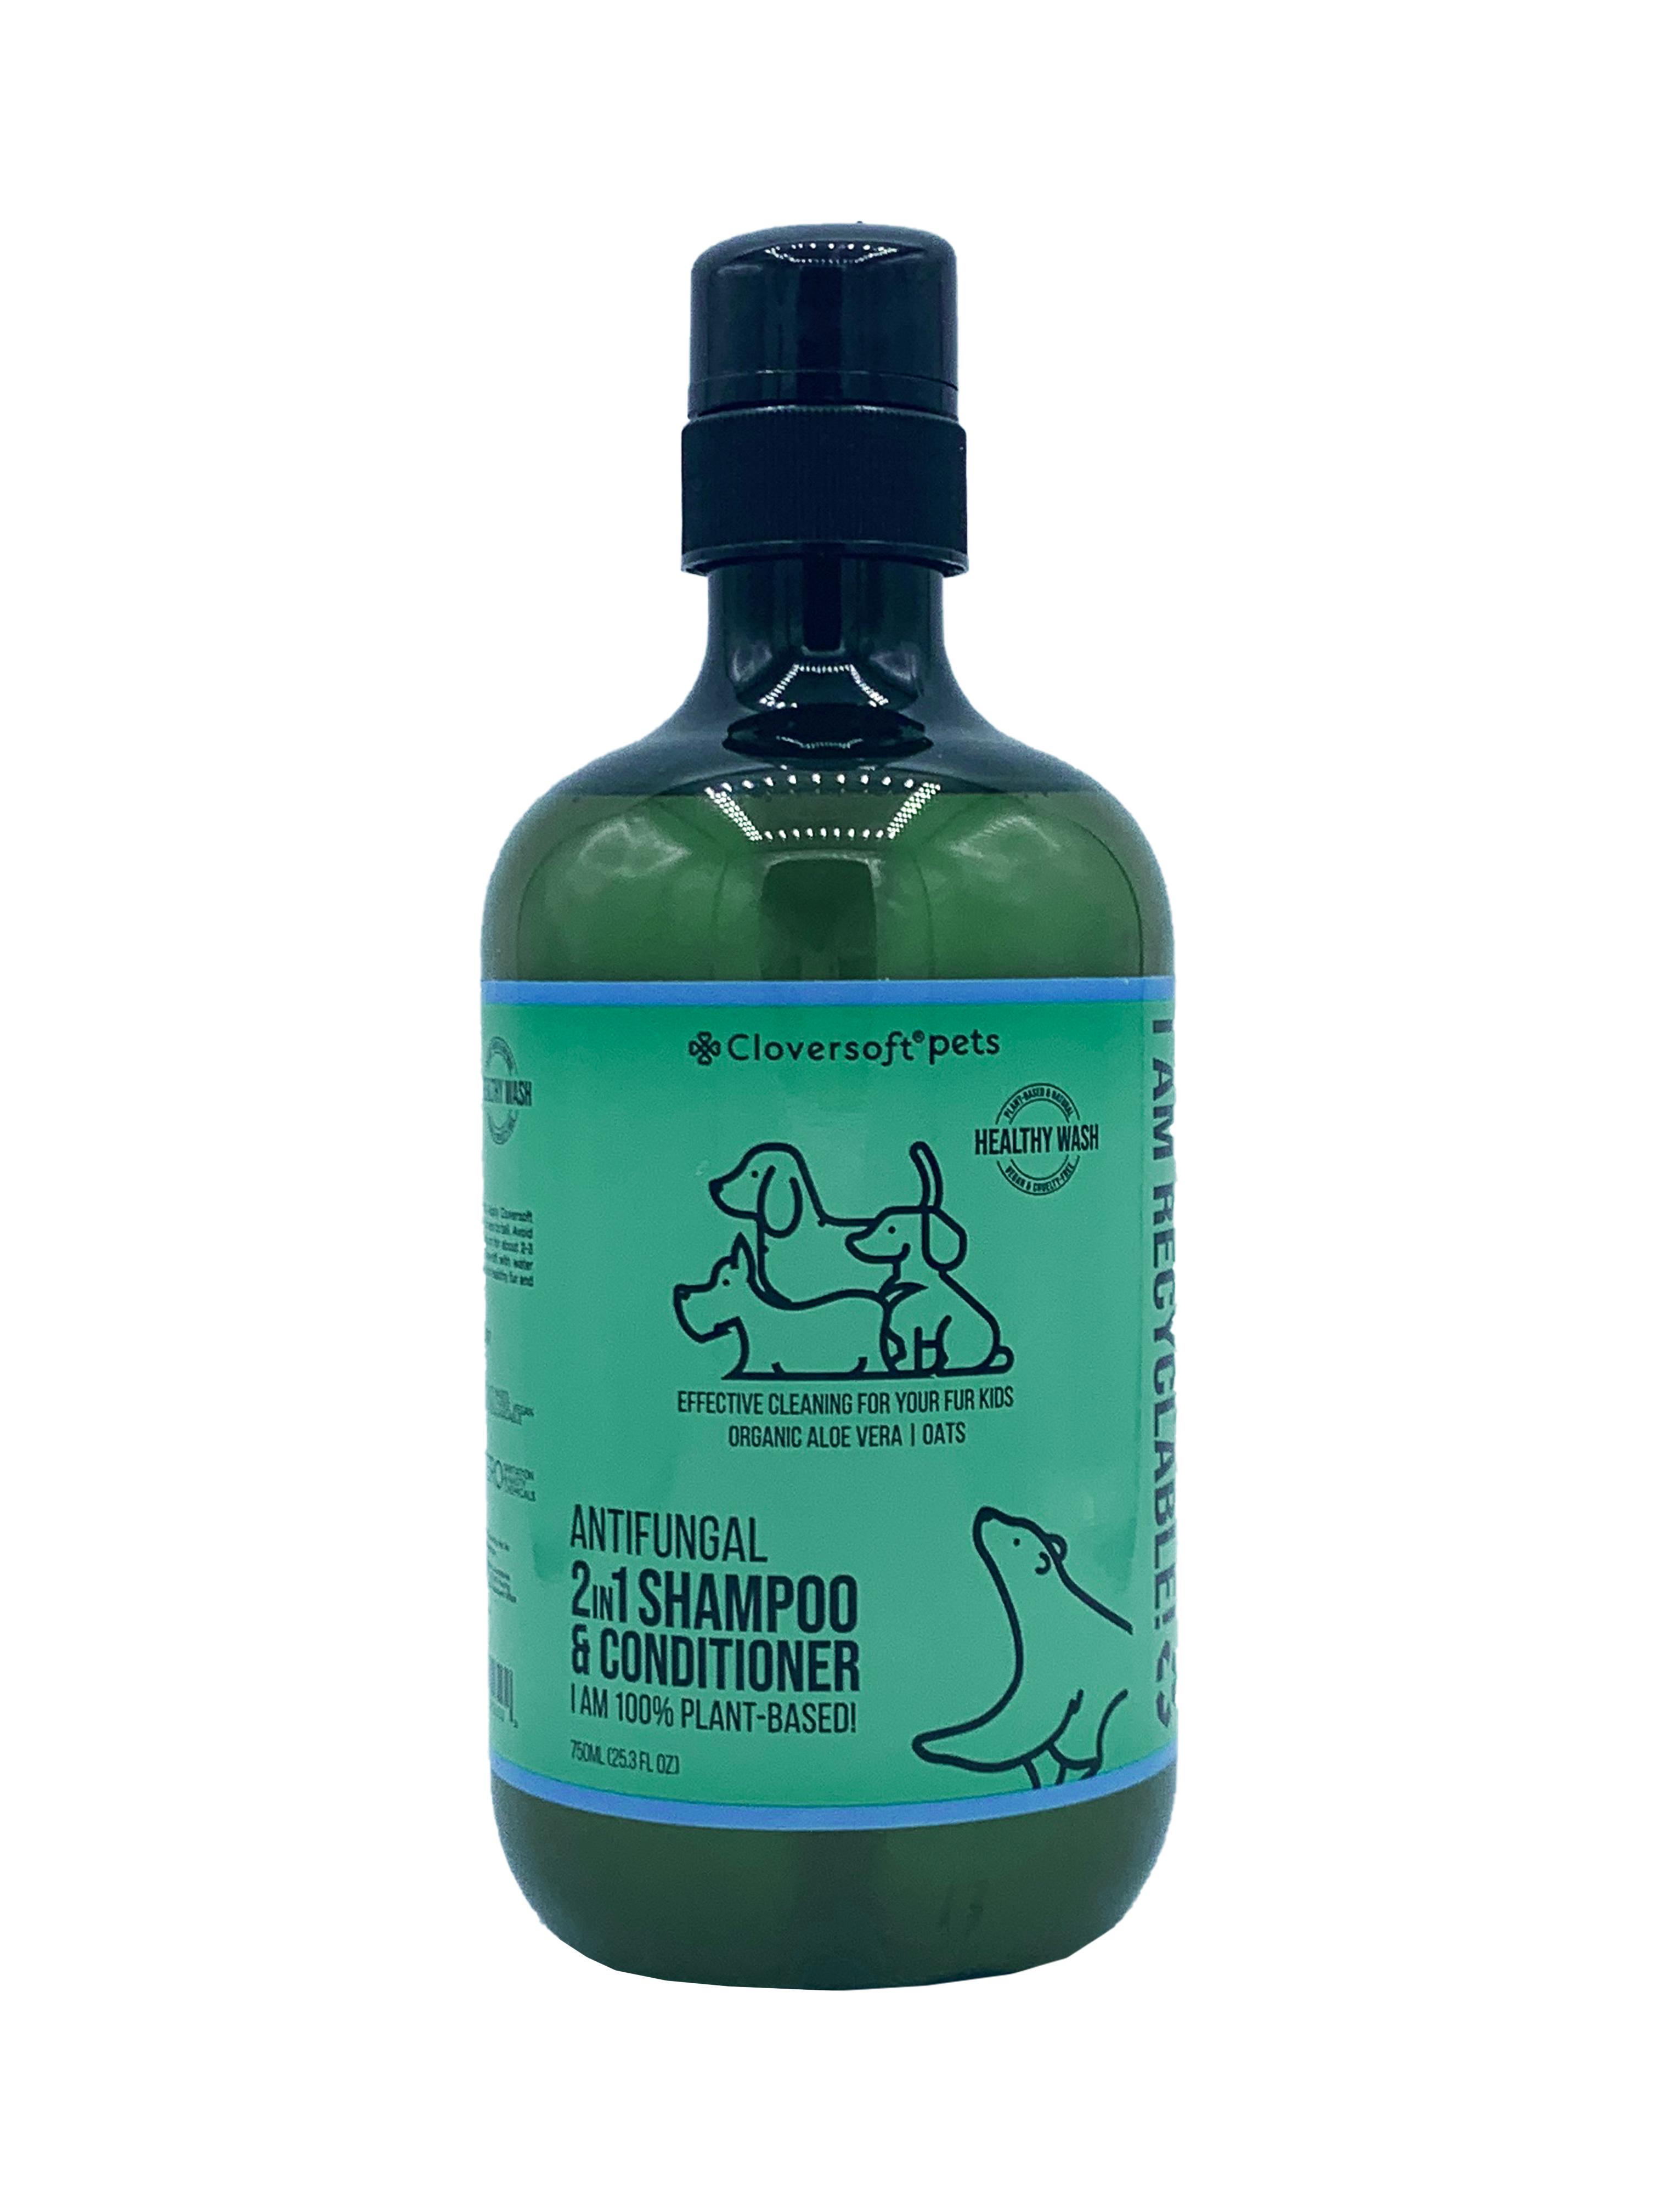 Cloversoft Plant-Based Two-in-One Anti-fungal Pet Shampoo and Conditioner